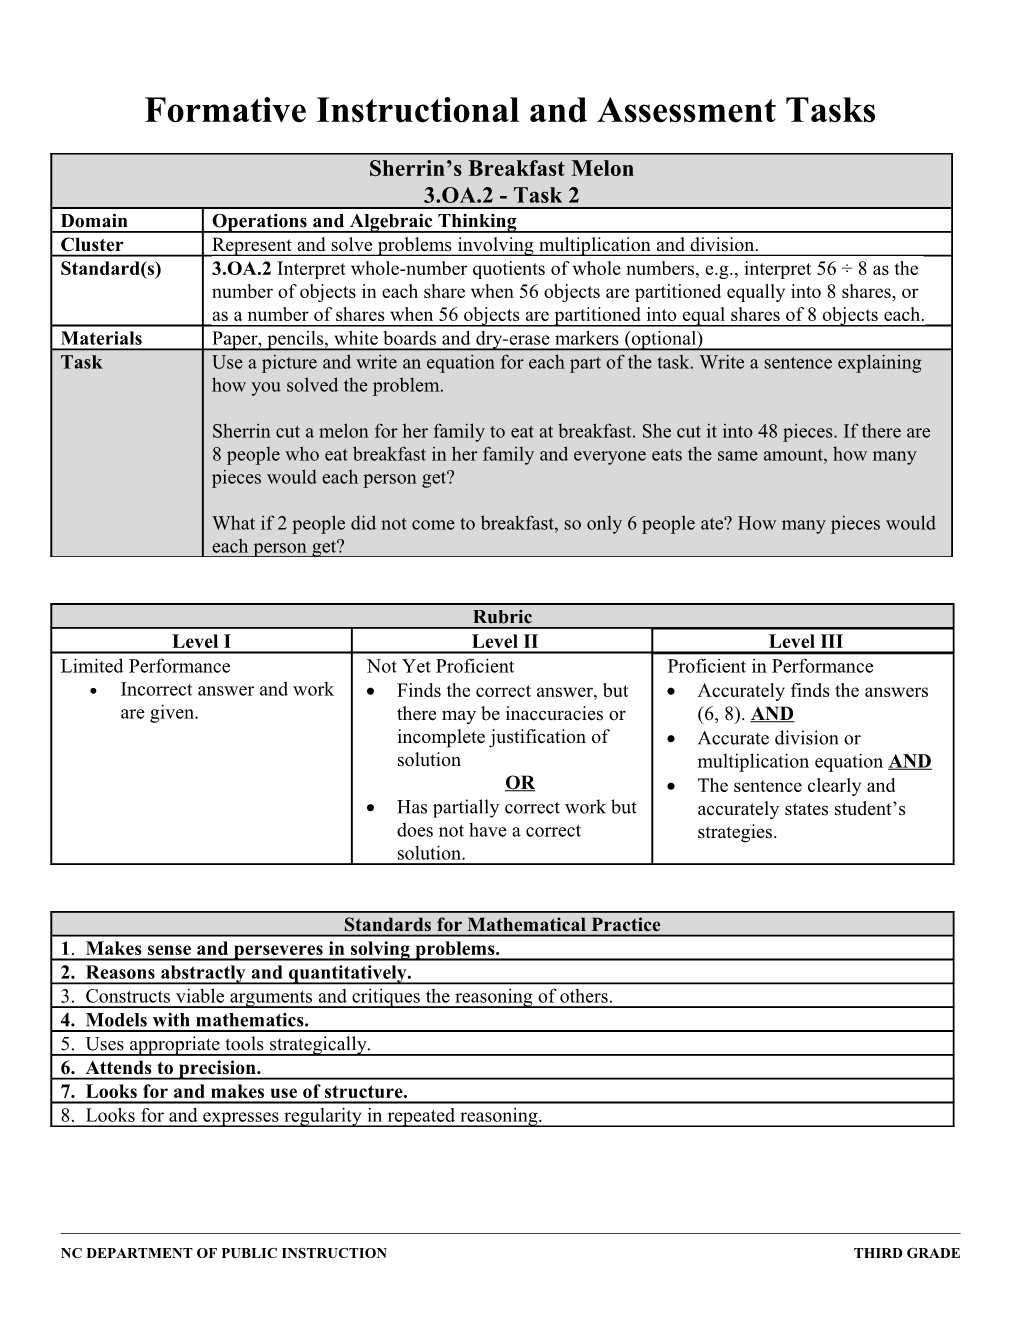 Formative Instructional and Assessment Tasks s12